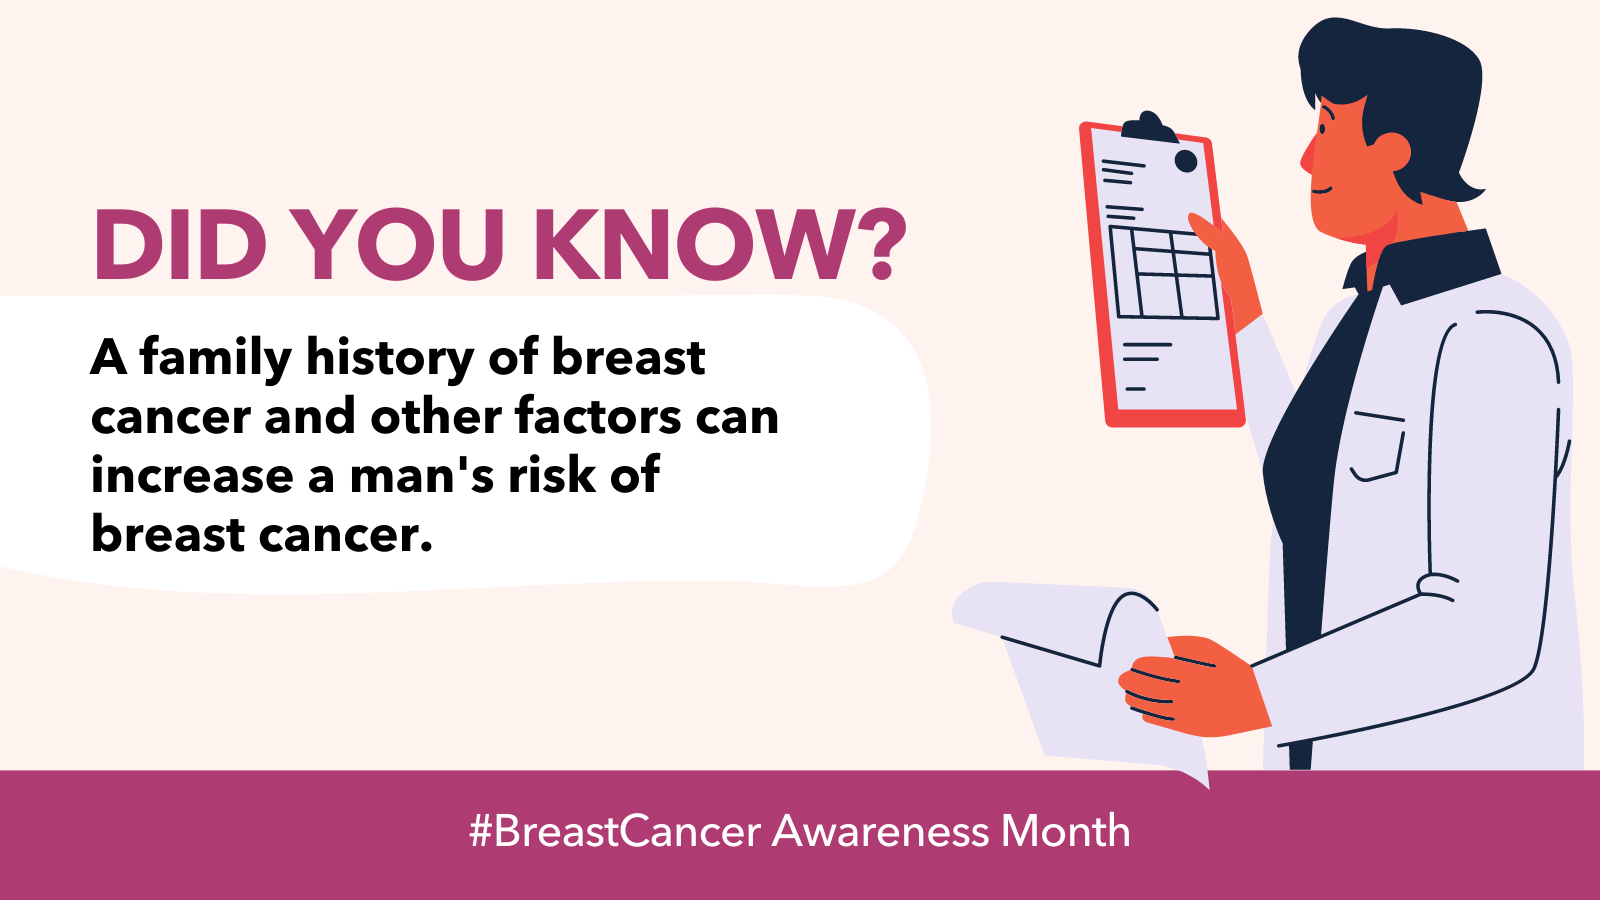 Did you know that a family history of breast cancer and other factors can increase a man's risk of breast cancer.